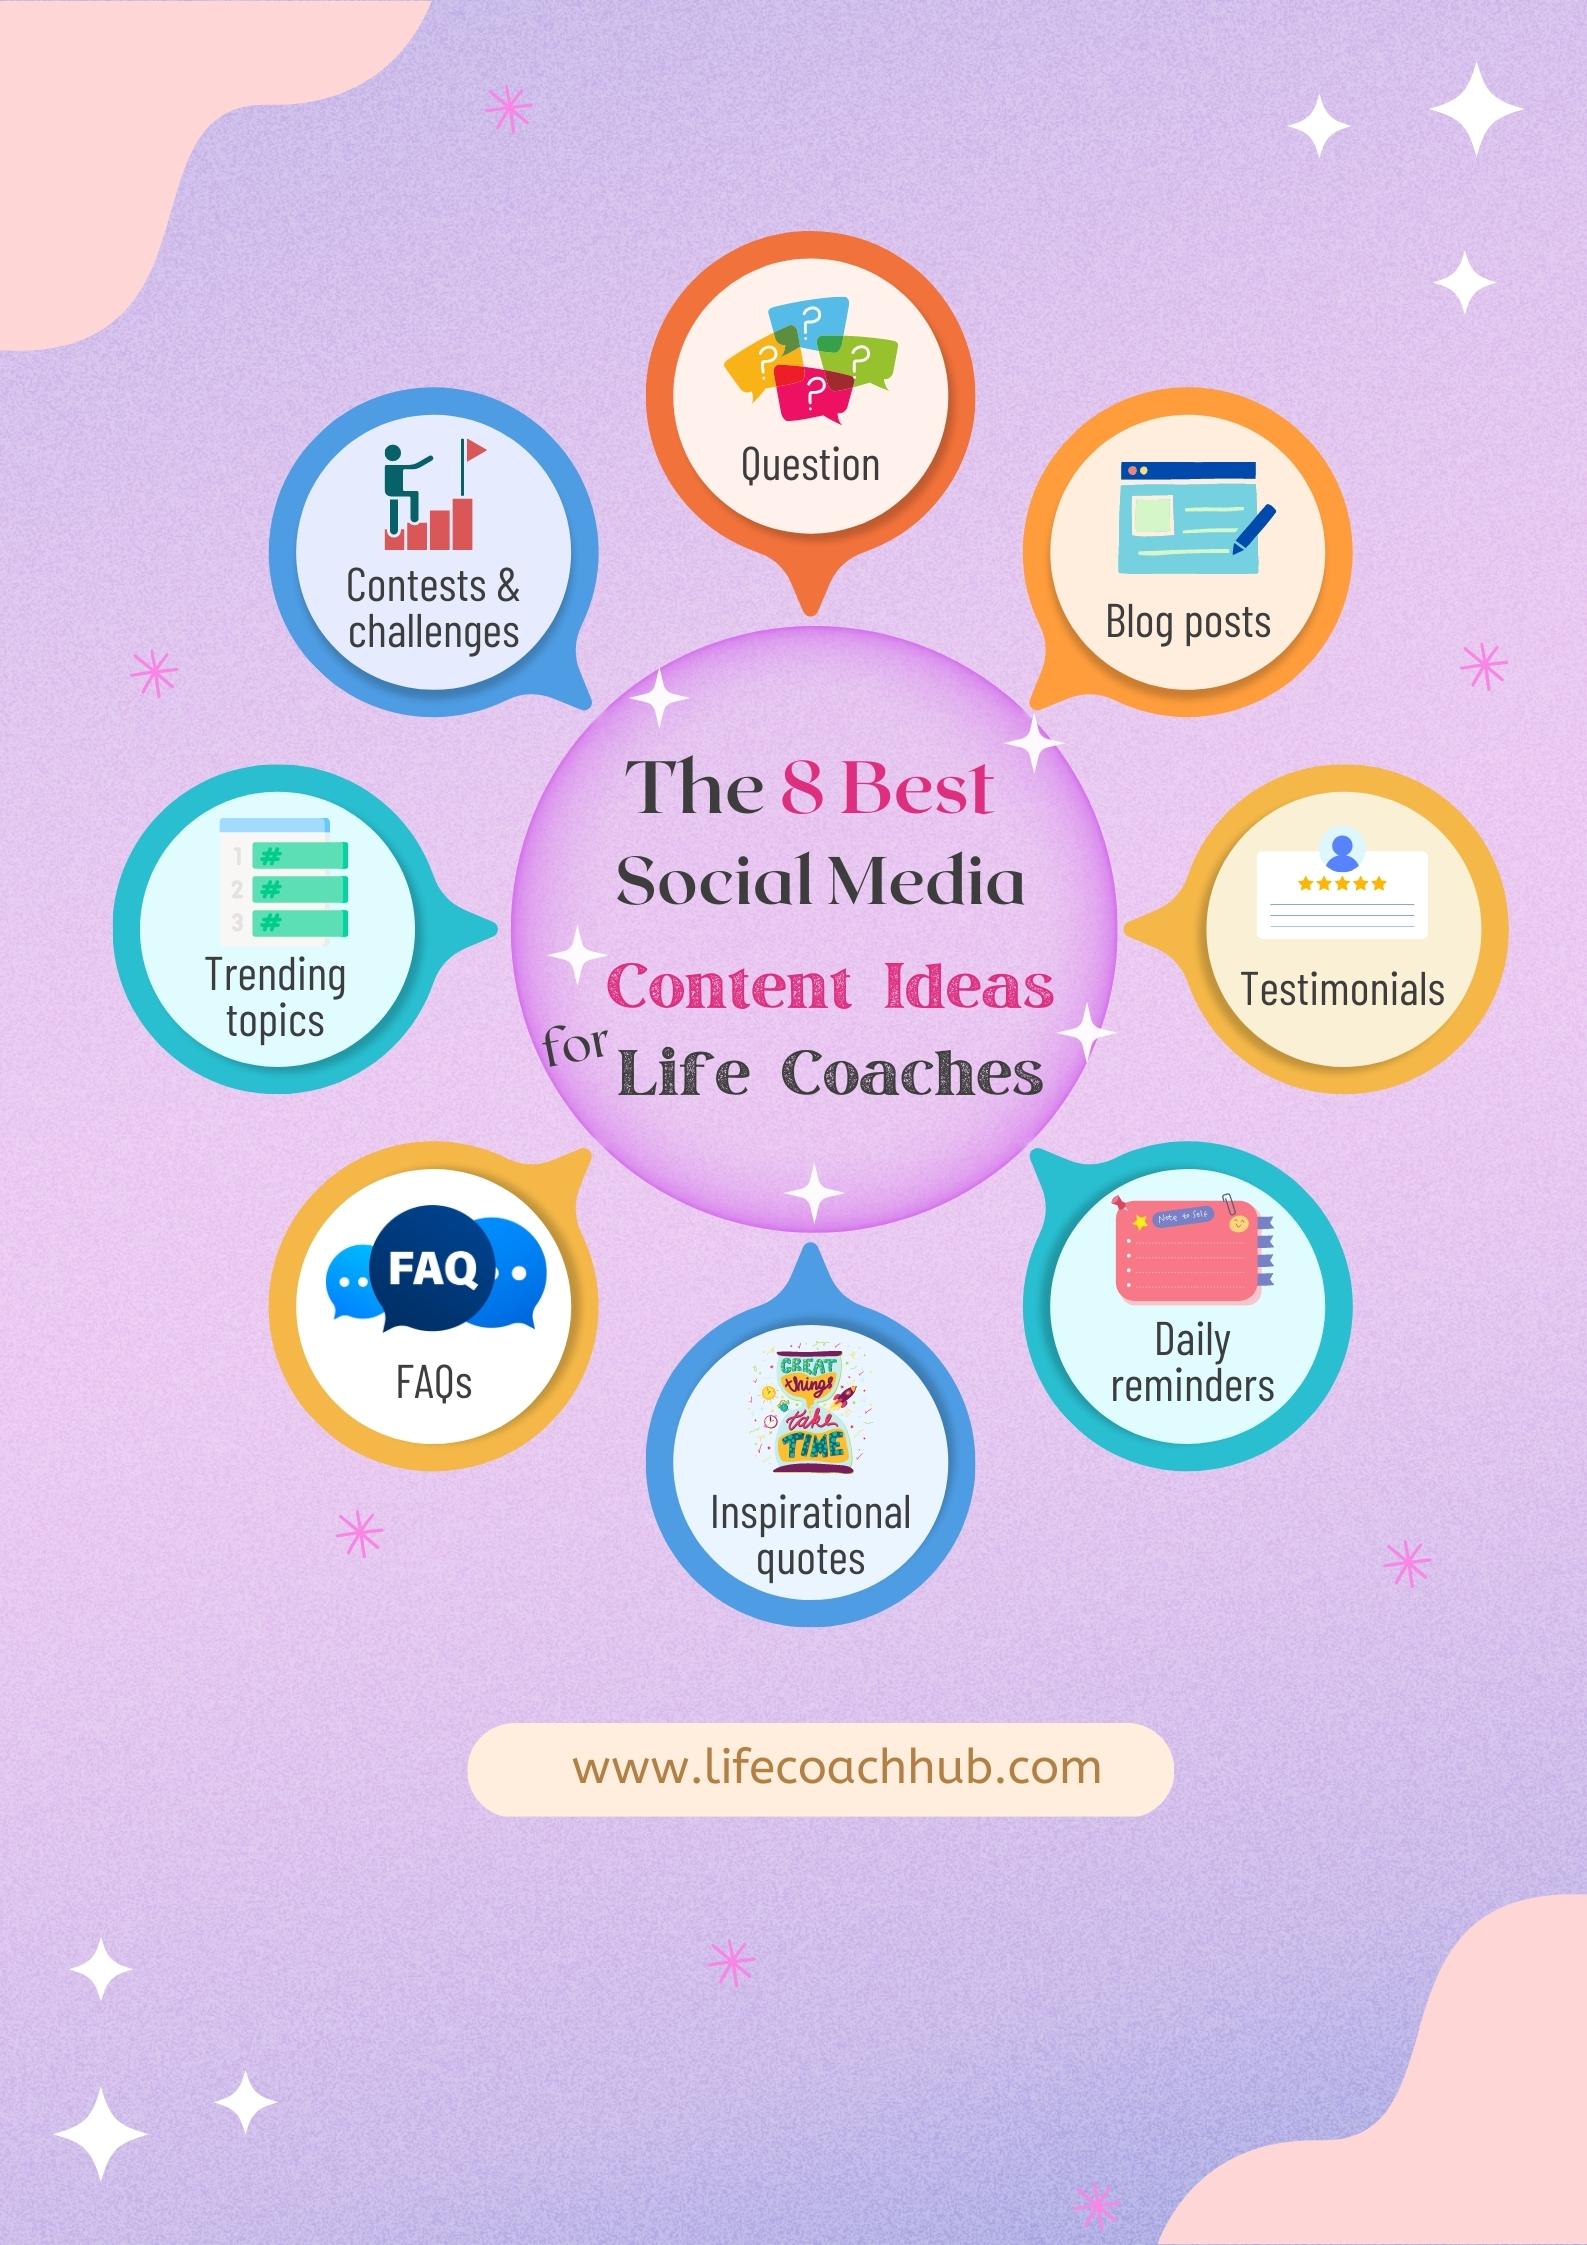 The 8 best social media content ideas for life coaches